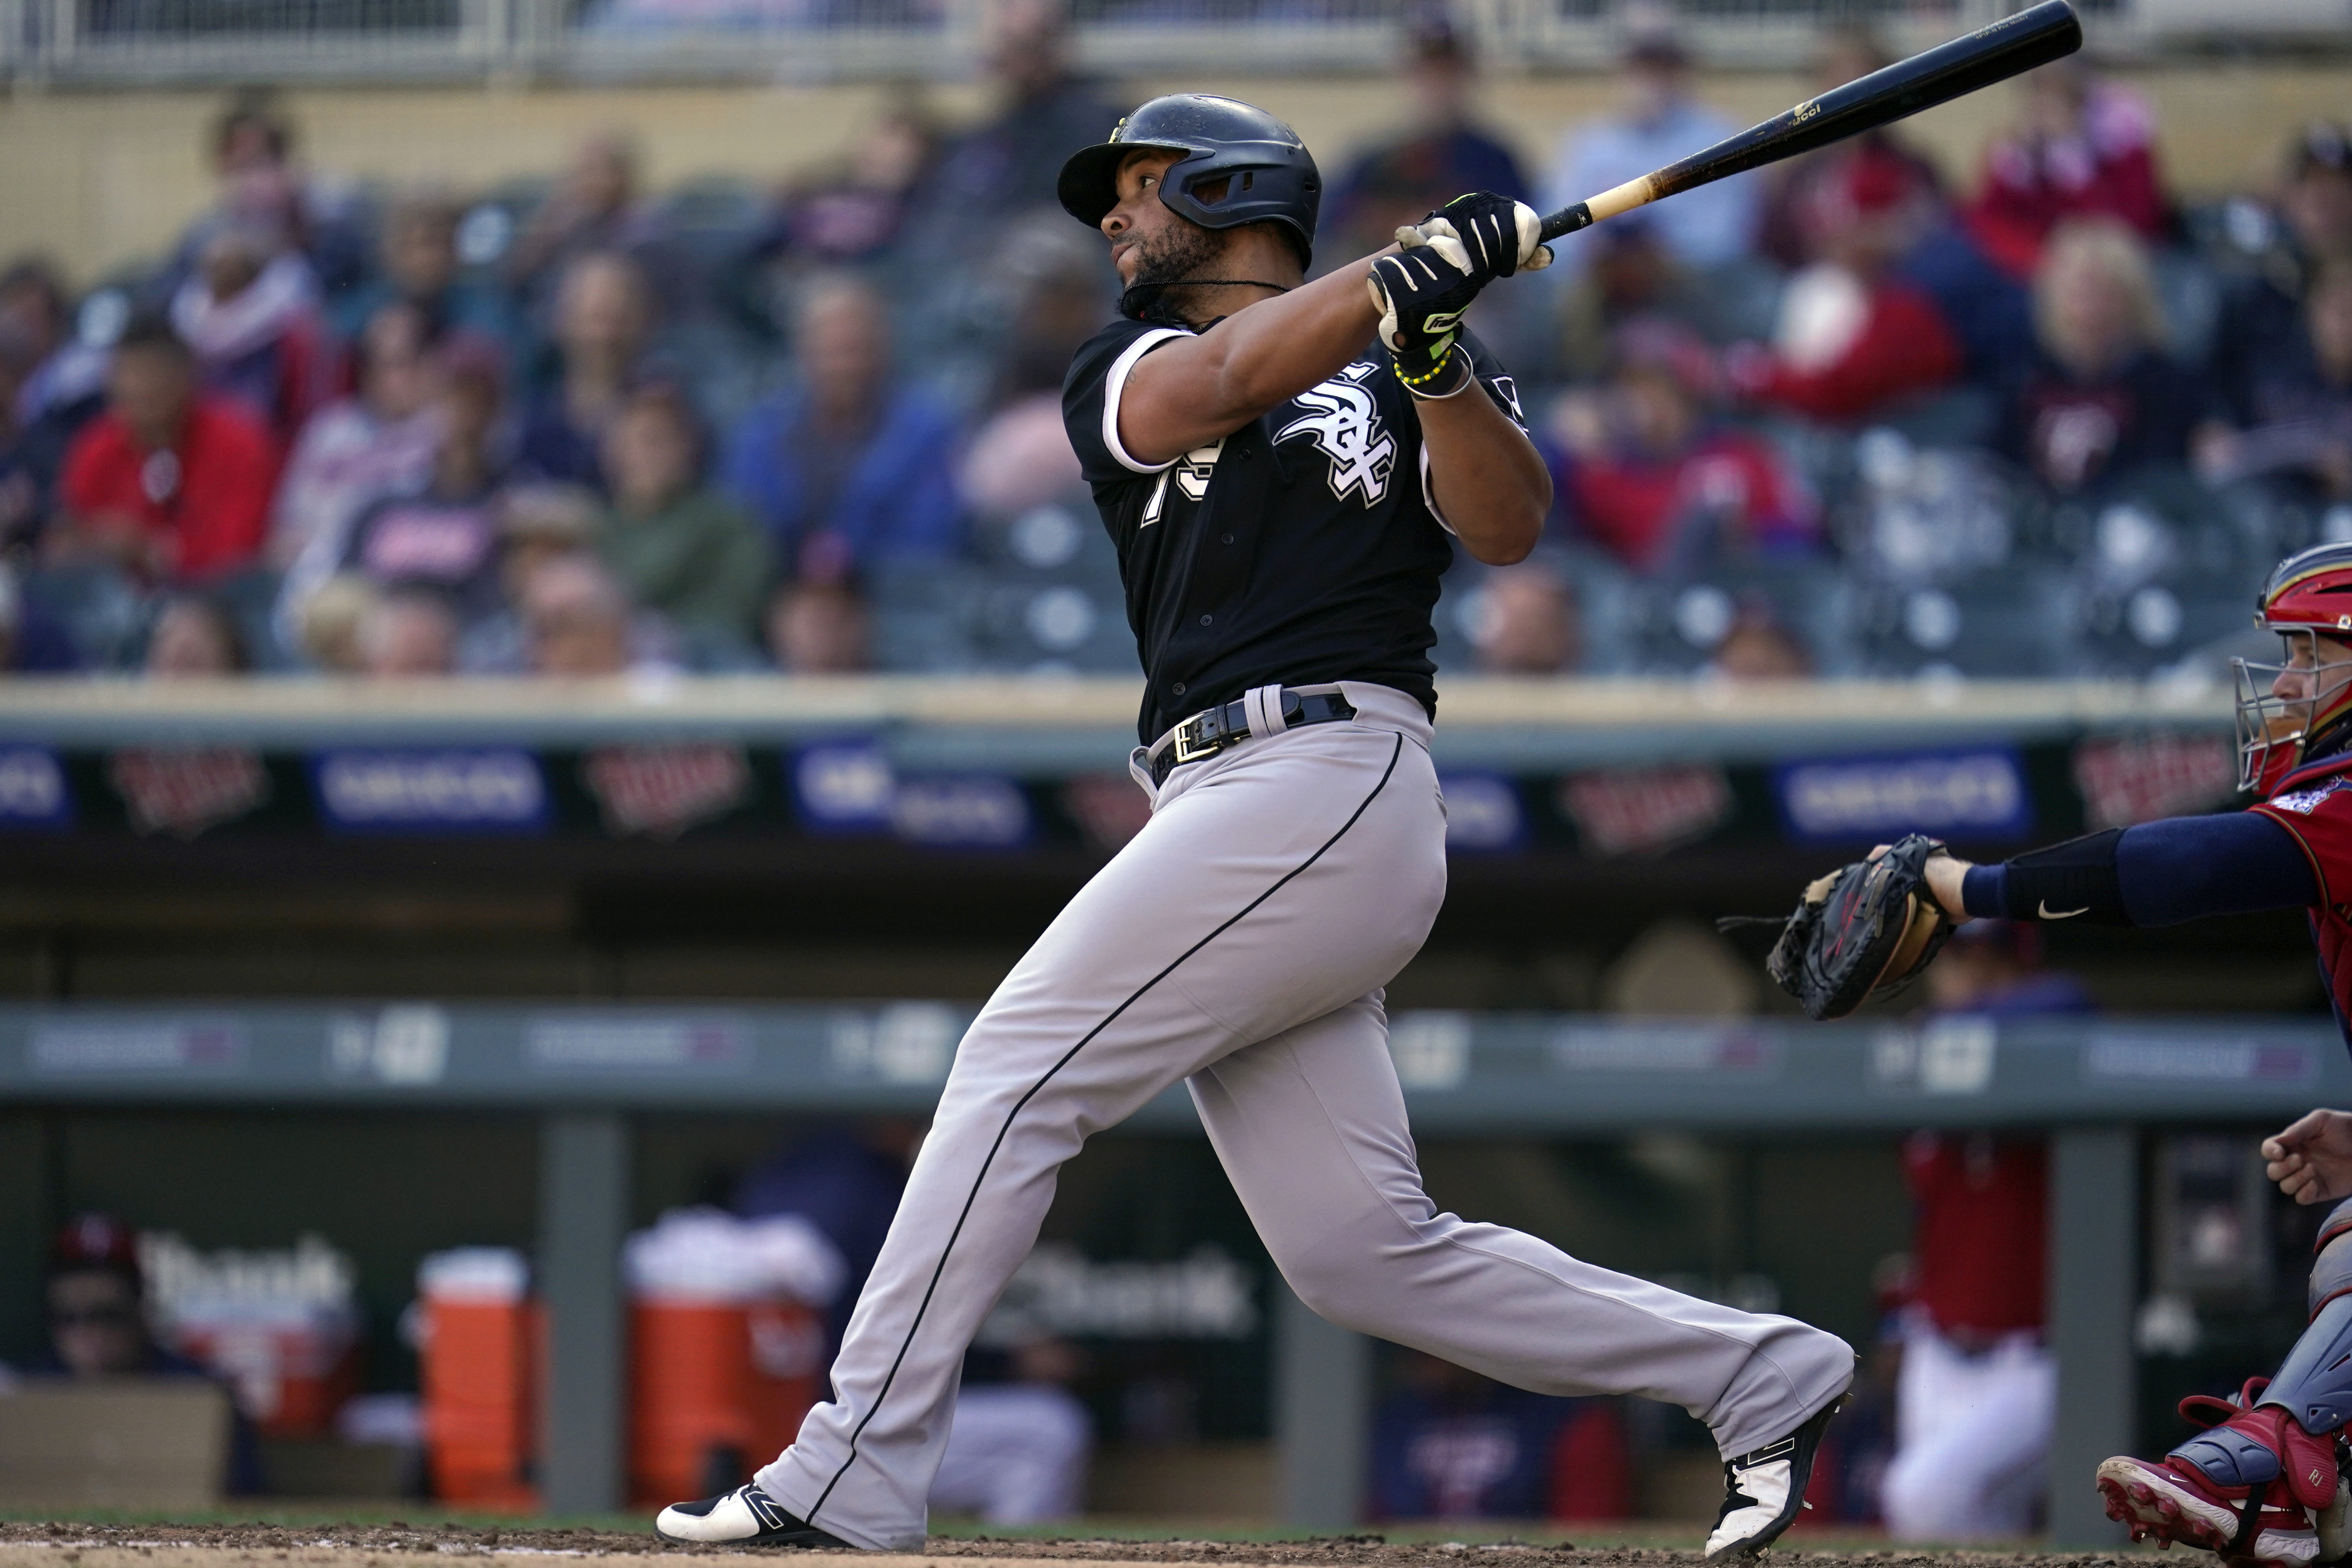 Free agent slugger José Abreu signs 3-year deal with Astros - The